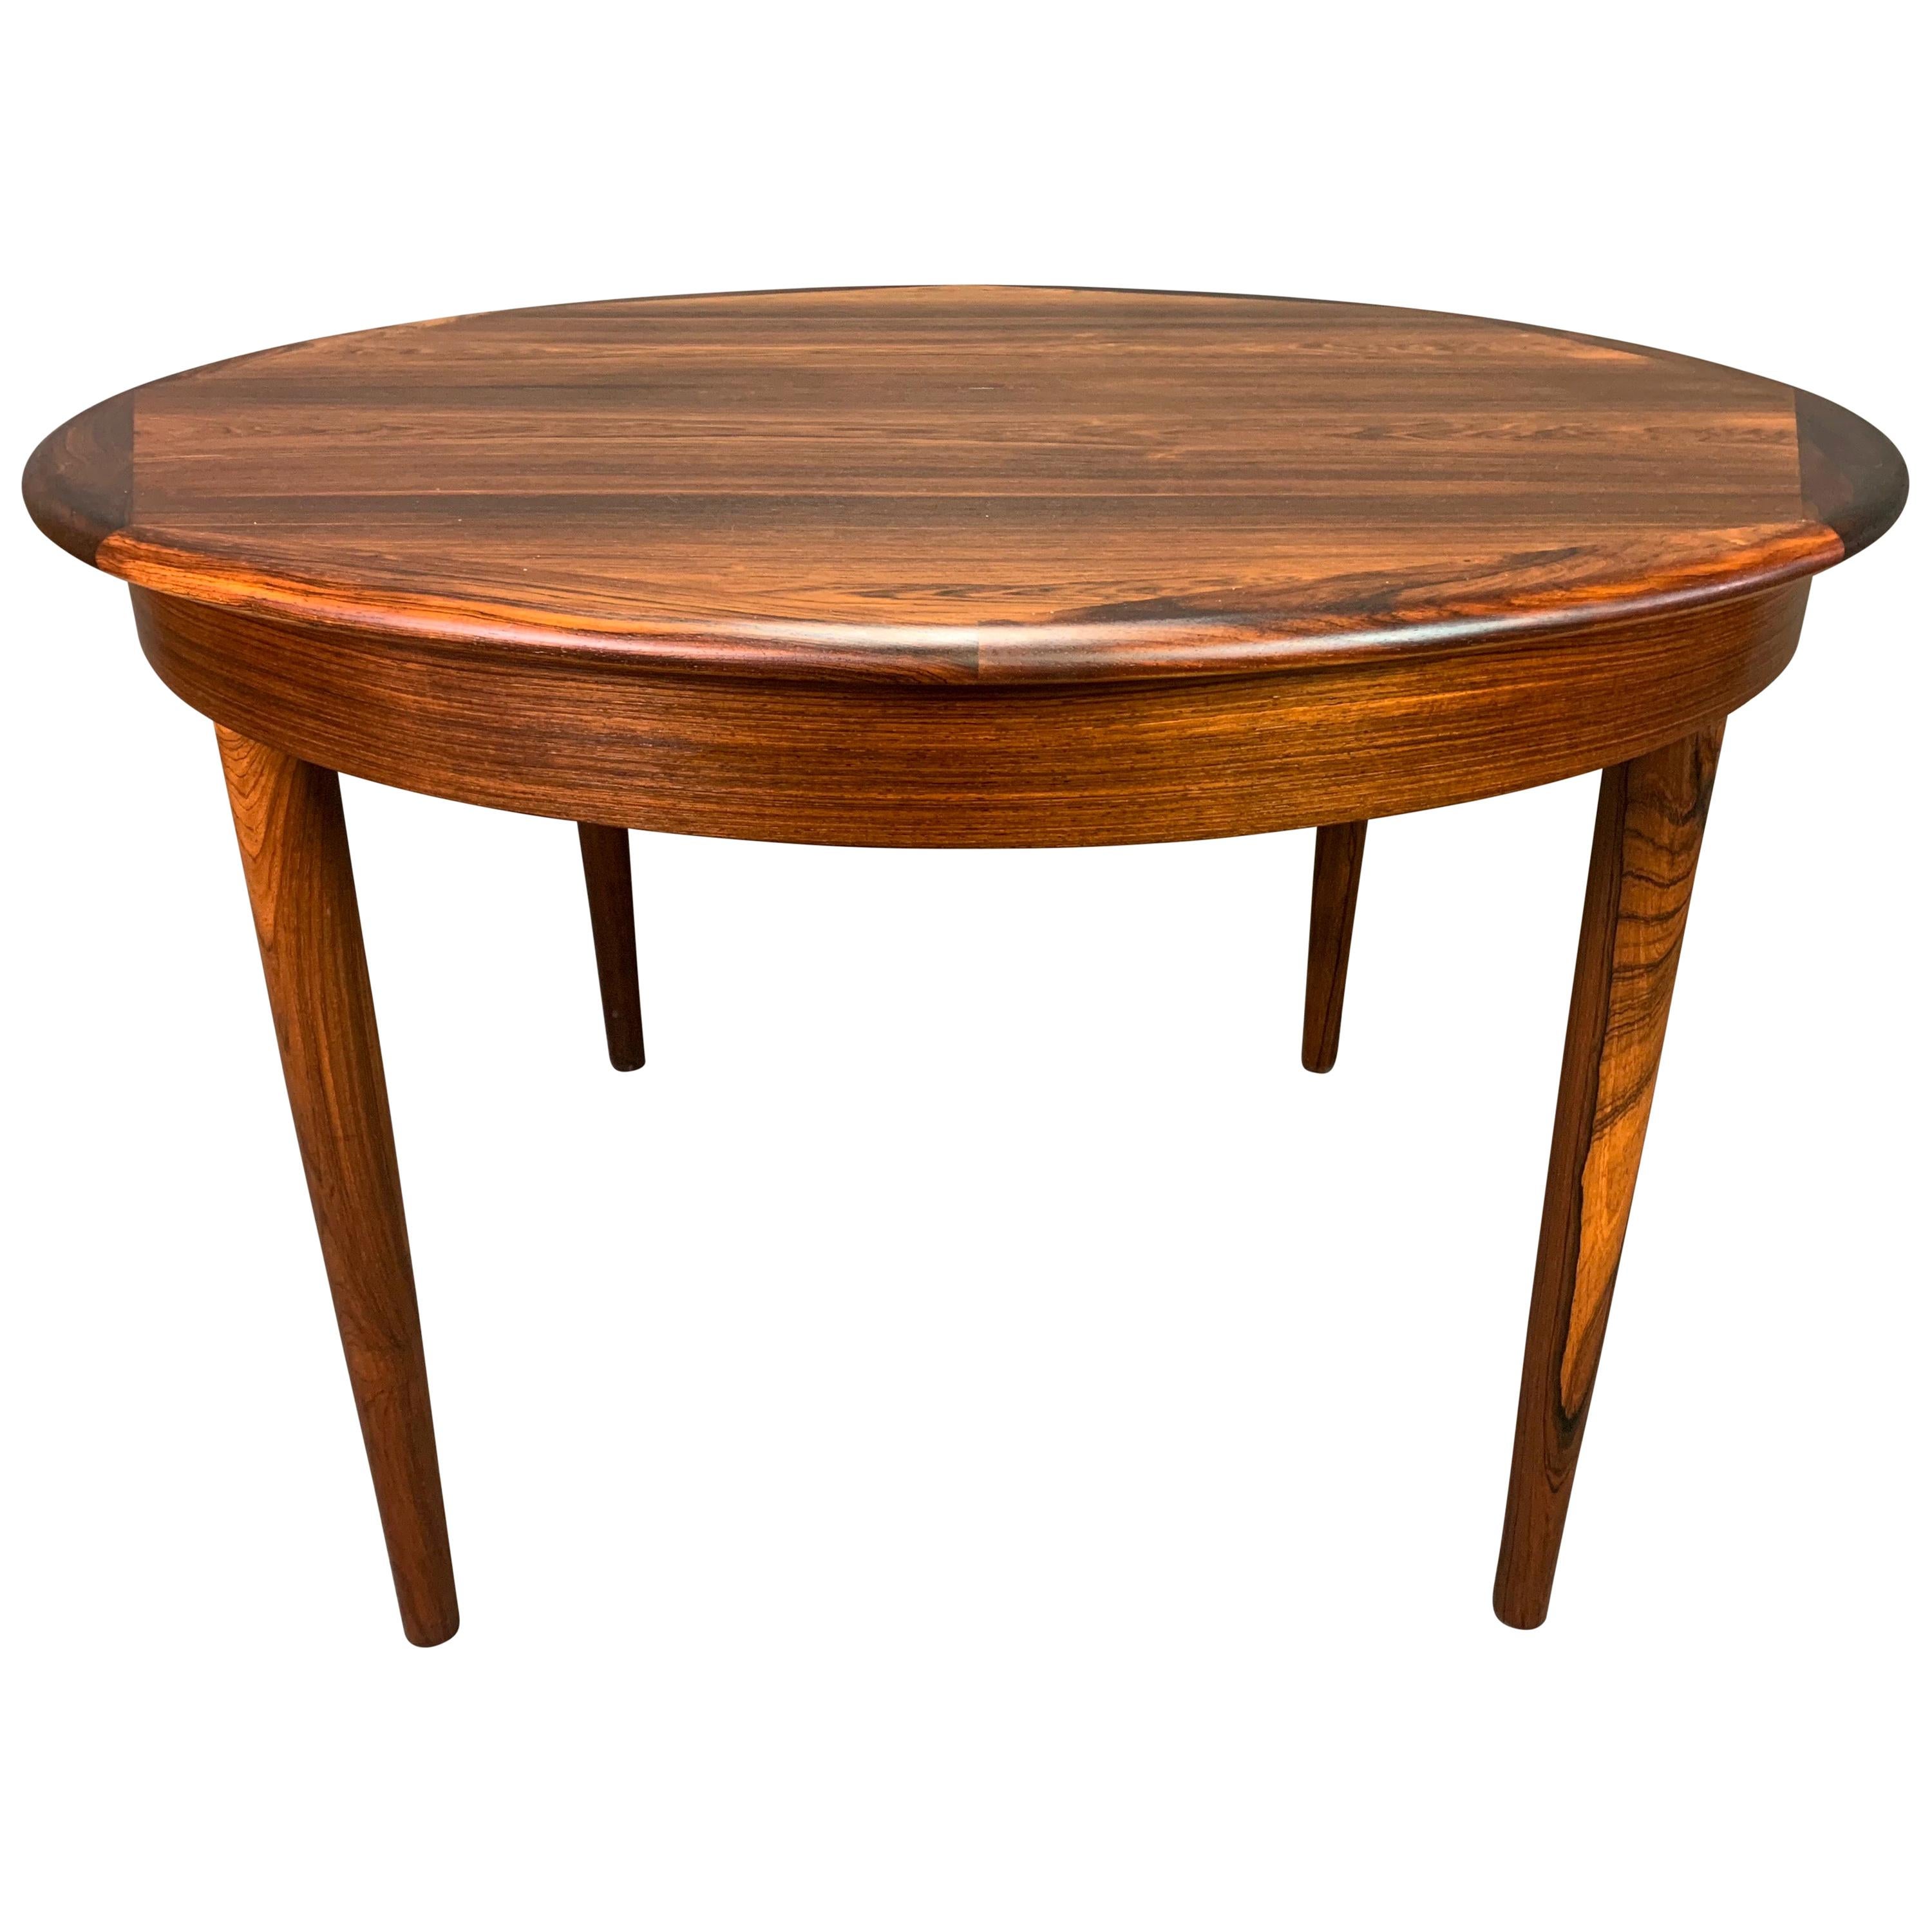 Vintage Danish Mid-Century Modern Rosewood Round Dining Table with Leaves